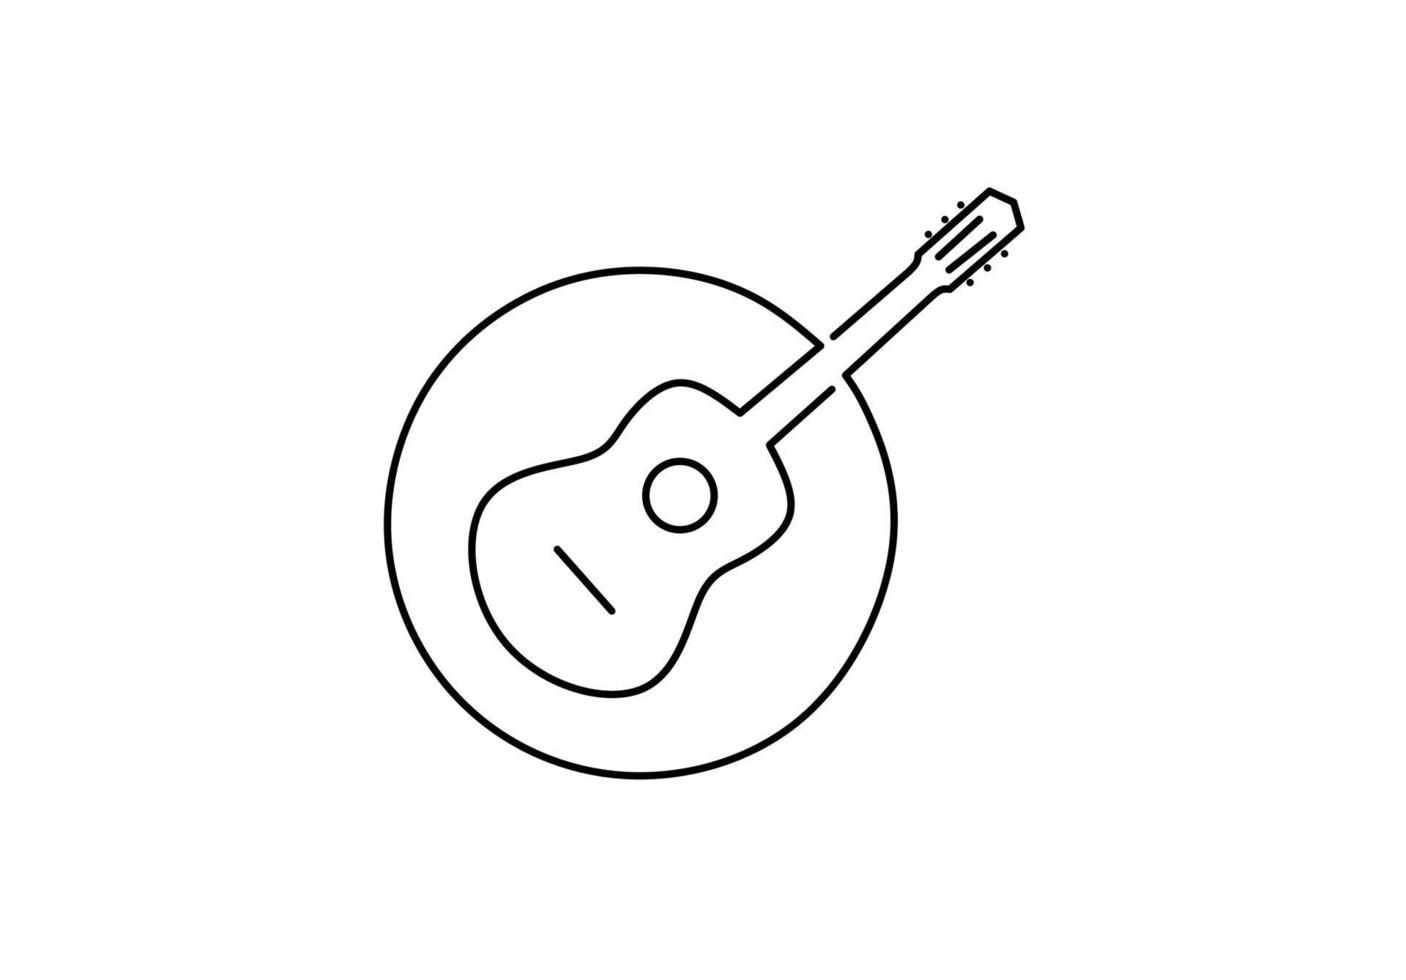 guitar line icon on circle isolated on white background vector